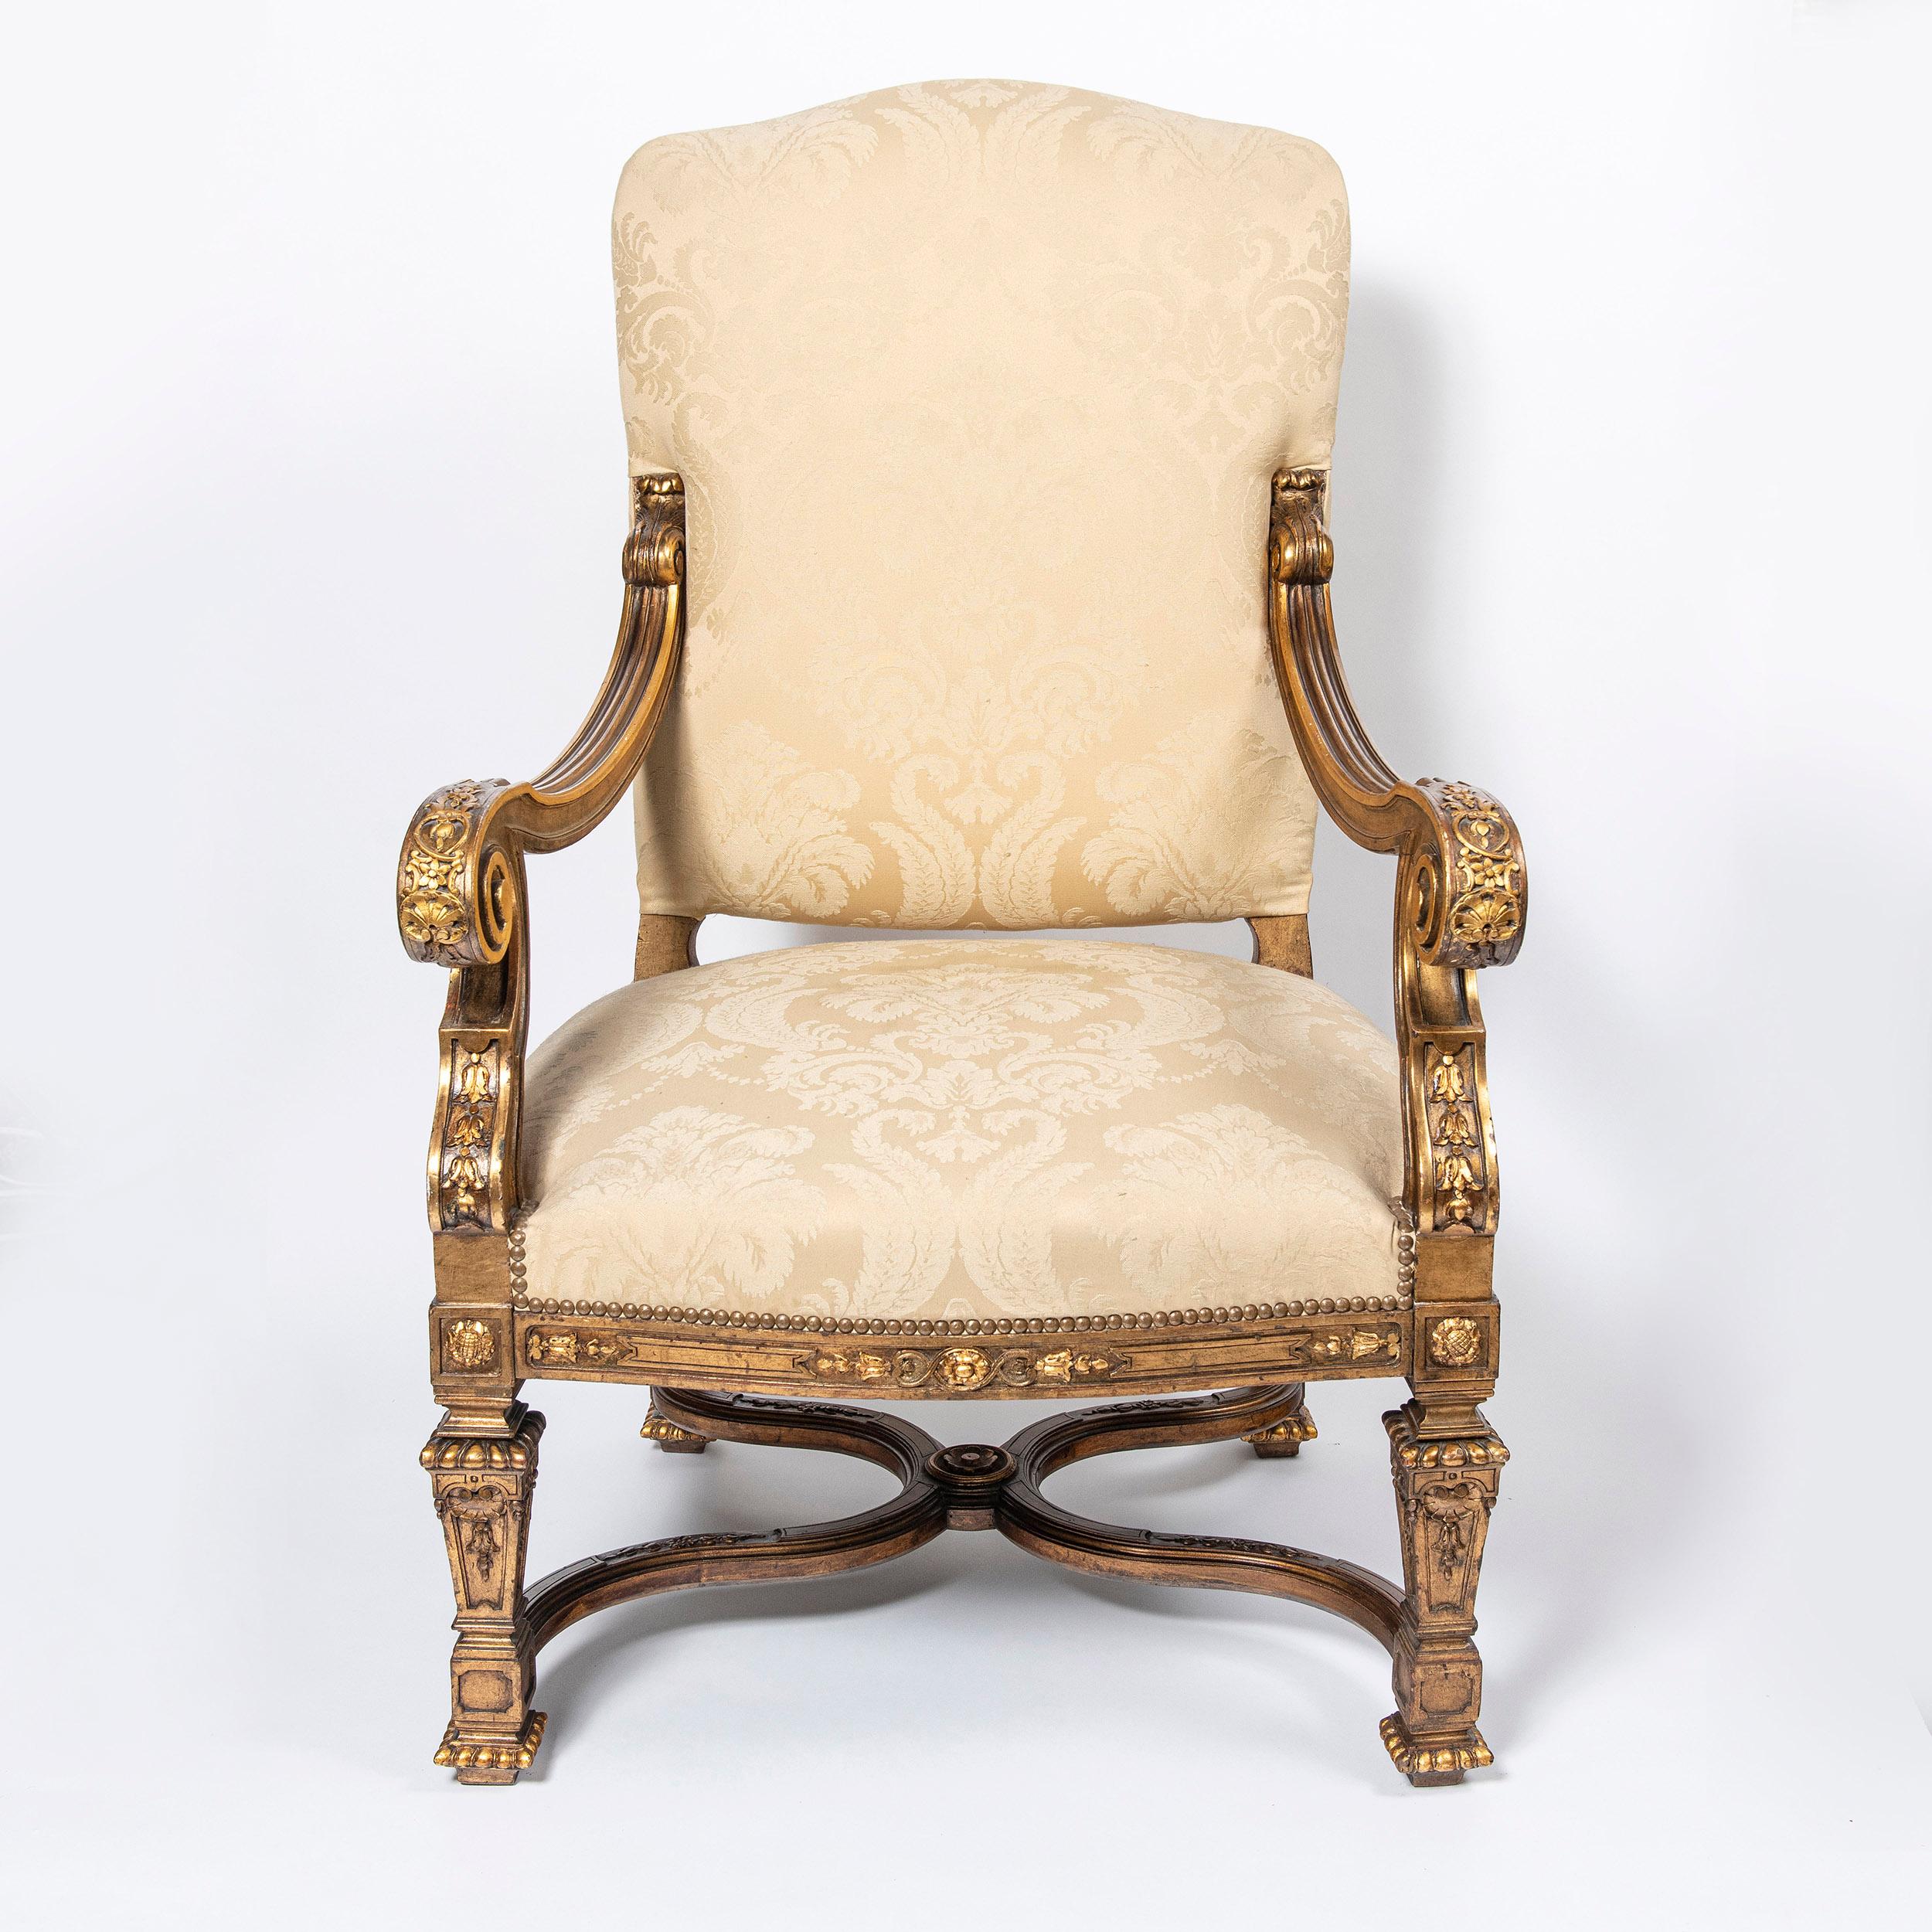 Pair of wood and gold leaf armchairs by Maison Forest, France, late 19th century.